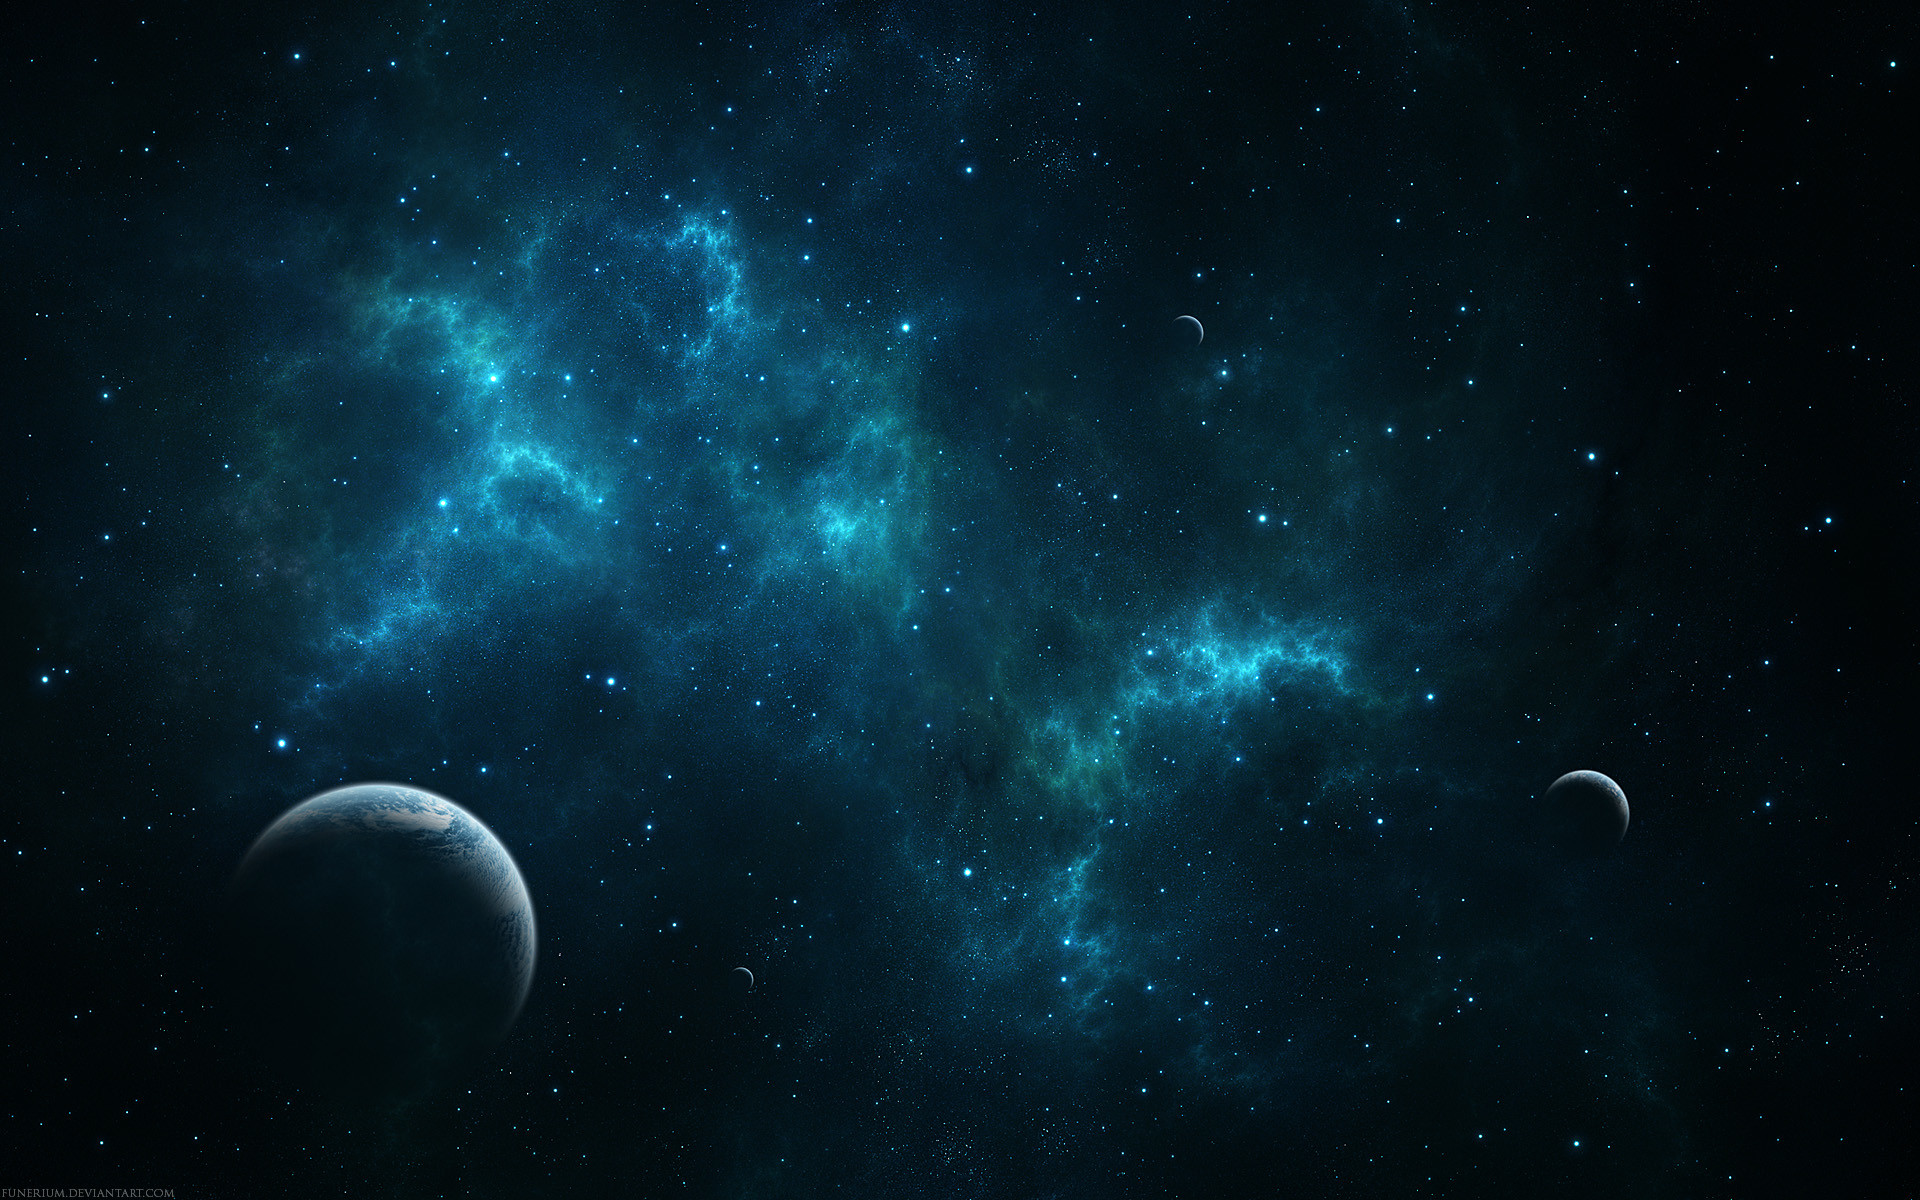 Download Free #Space #Wallpapers, Pictures and Desktop Backgrounds. Amazing  collection of Widescreen